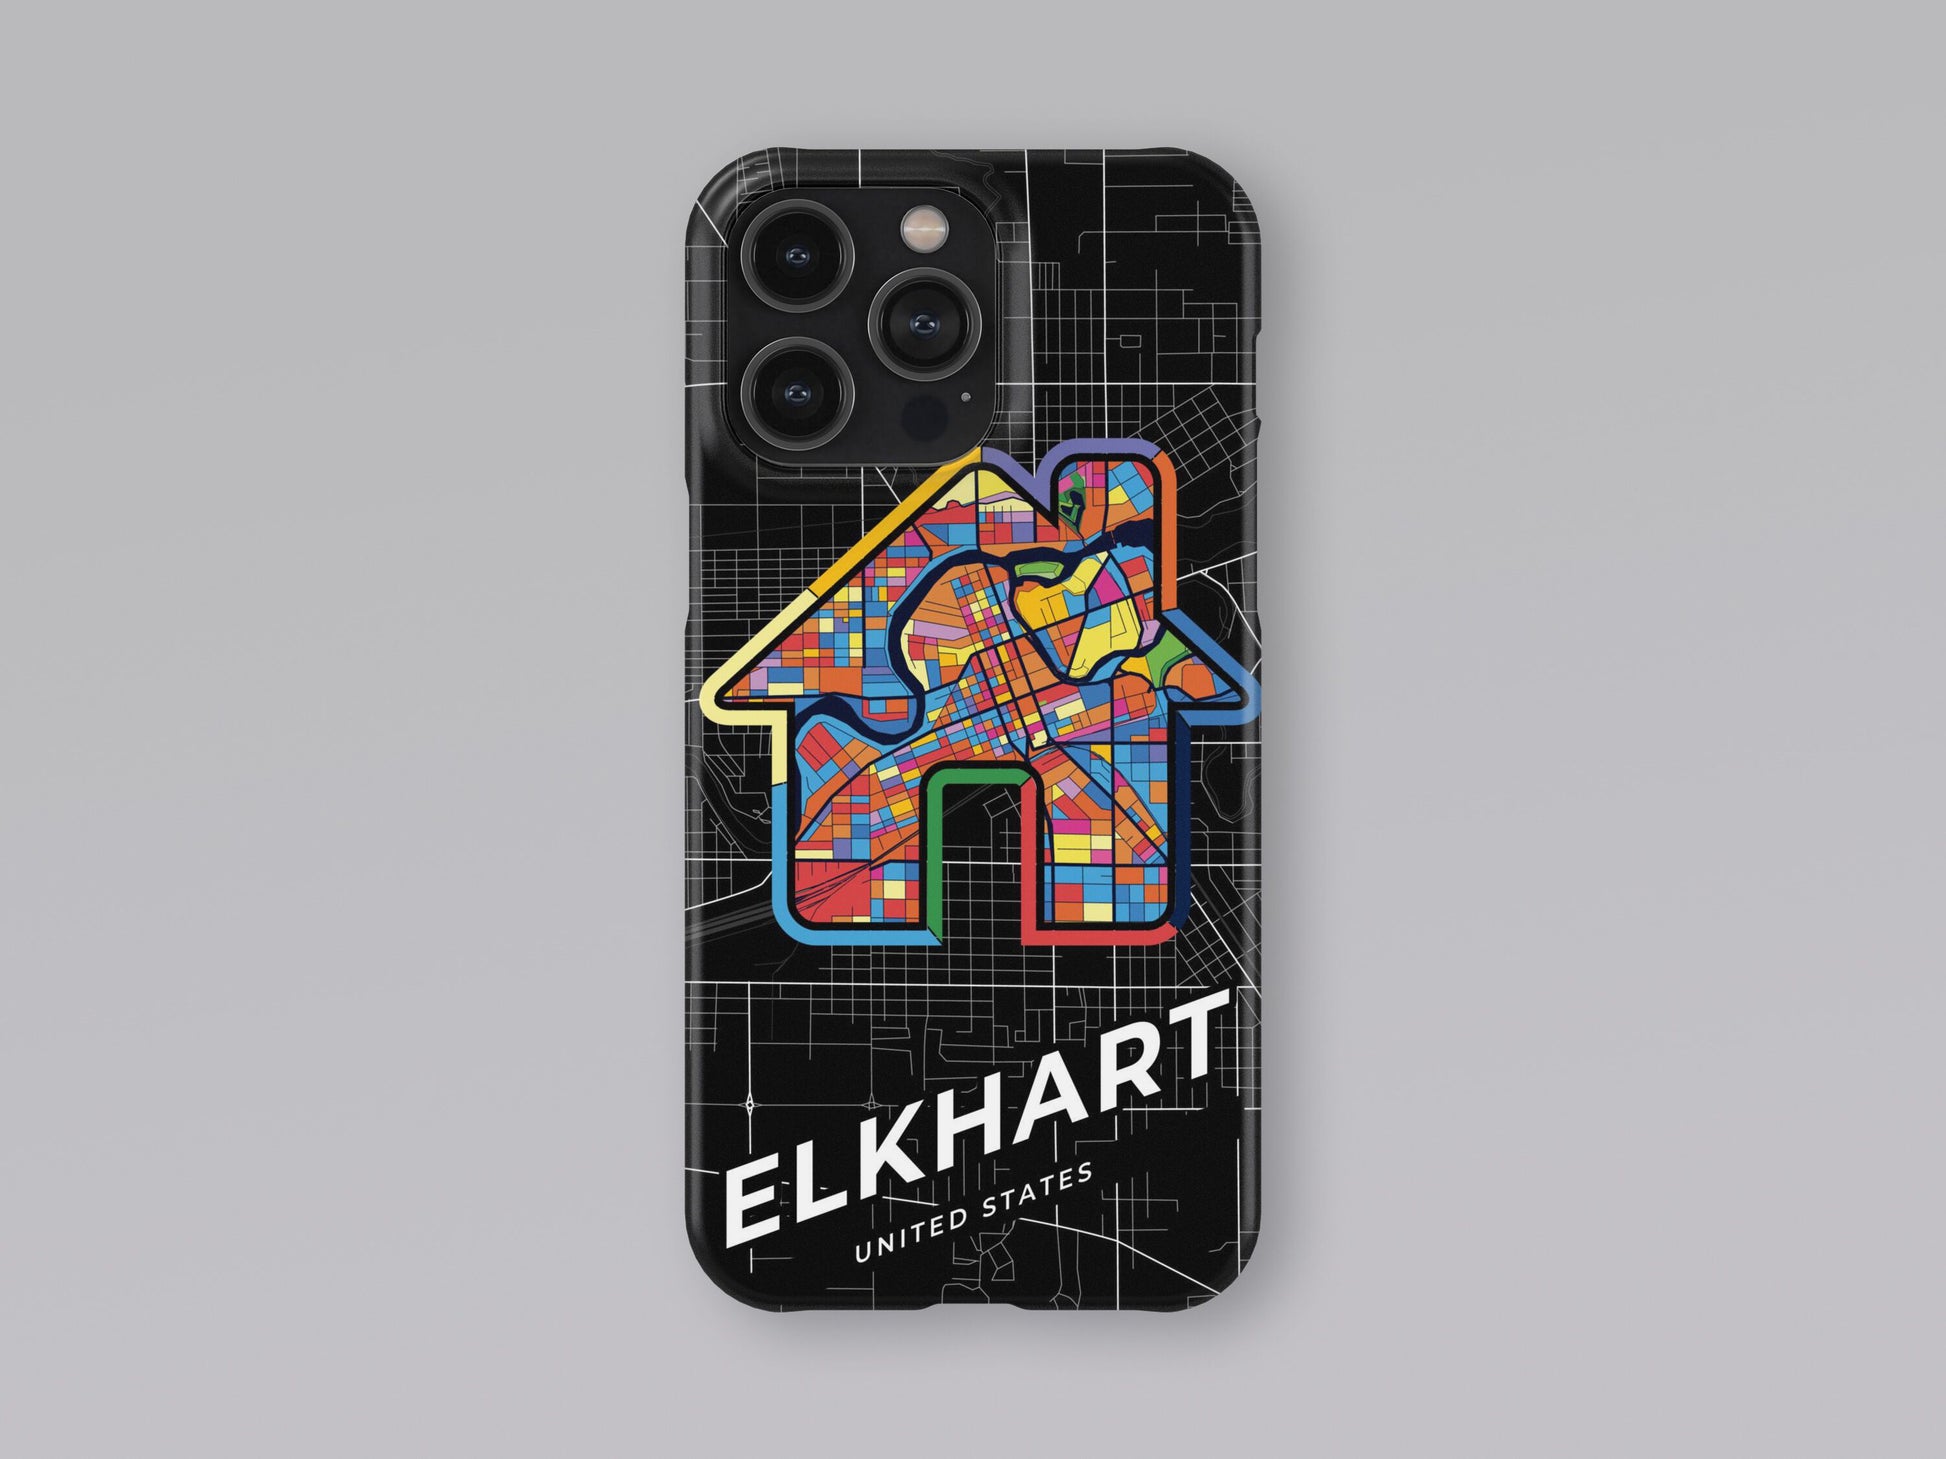 Elkhart Indiana slim phone case with colorful icon. Birthday, wedding or housewarming gift. Couple match cases. 3